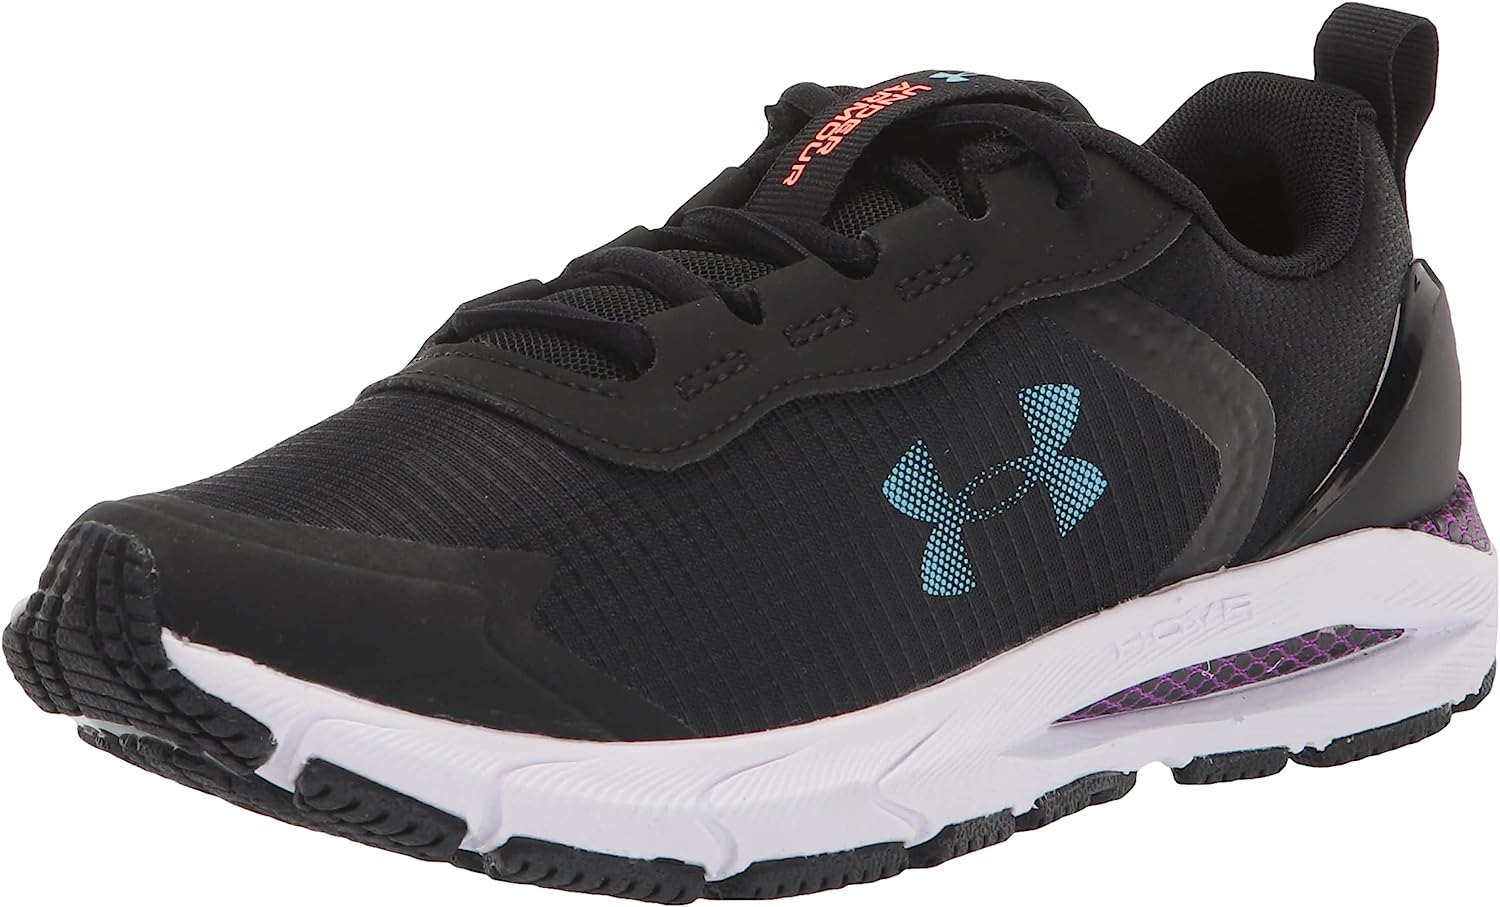 Under Armour Women's HOVR Sonic Special Edition Walking Shoe